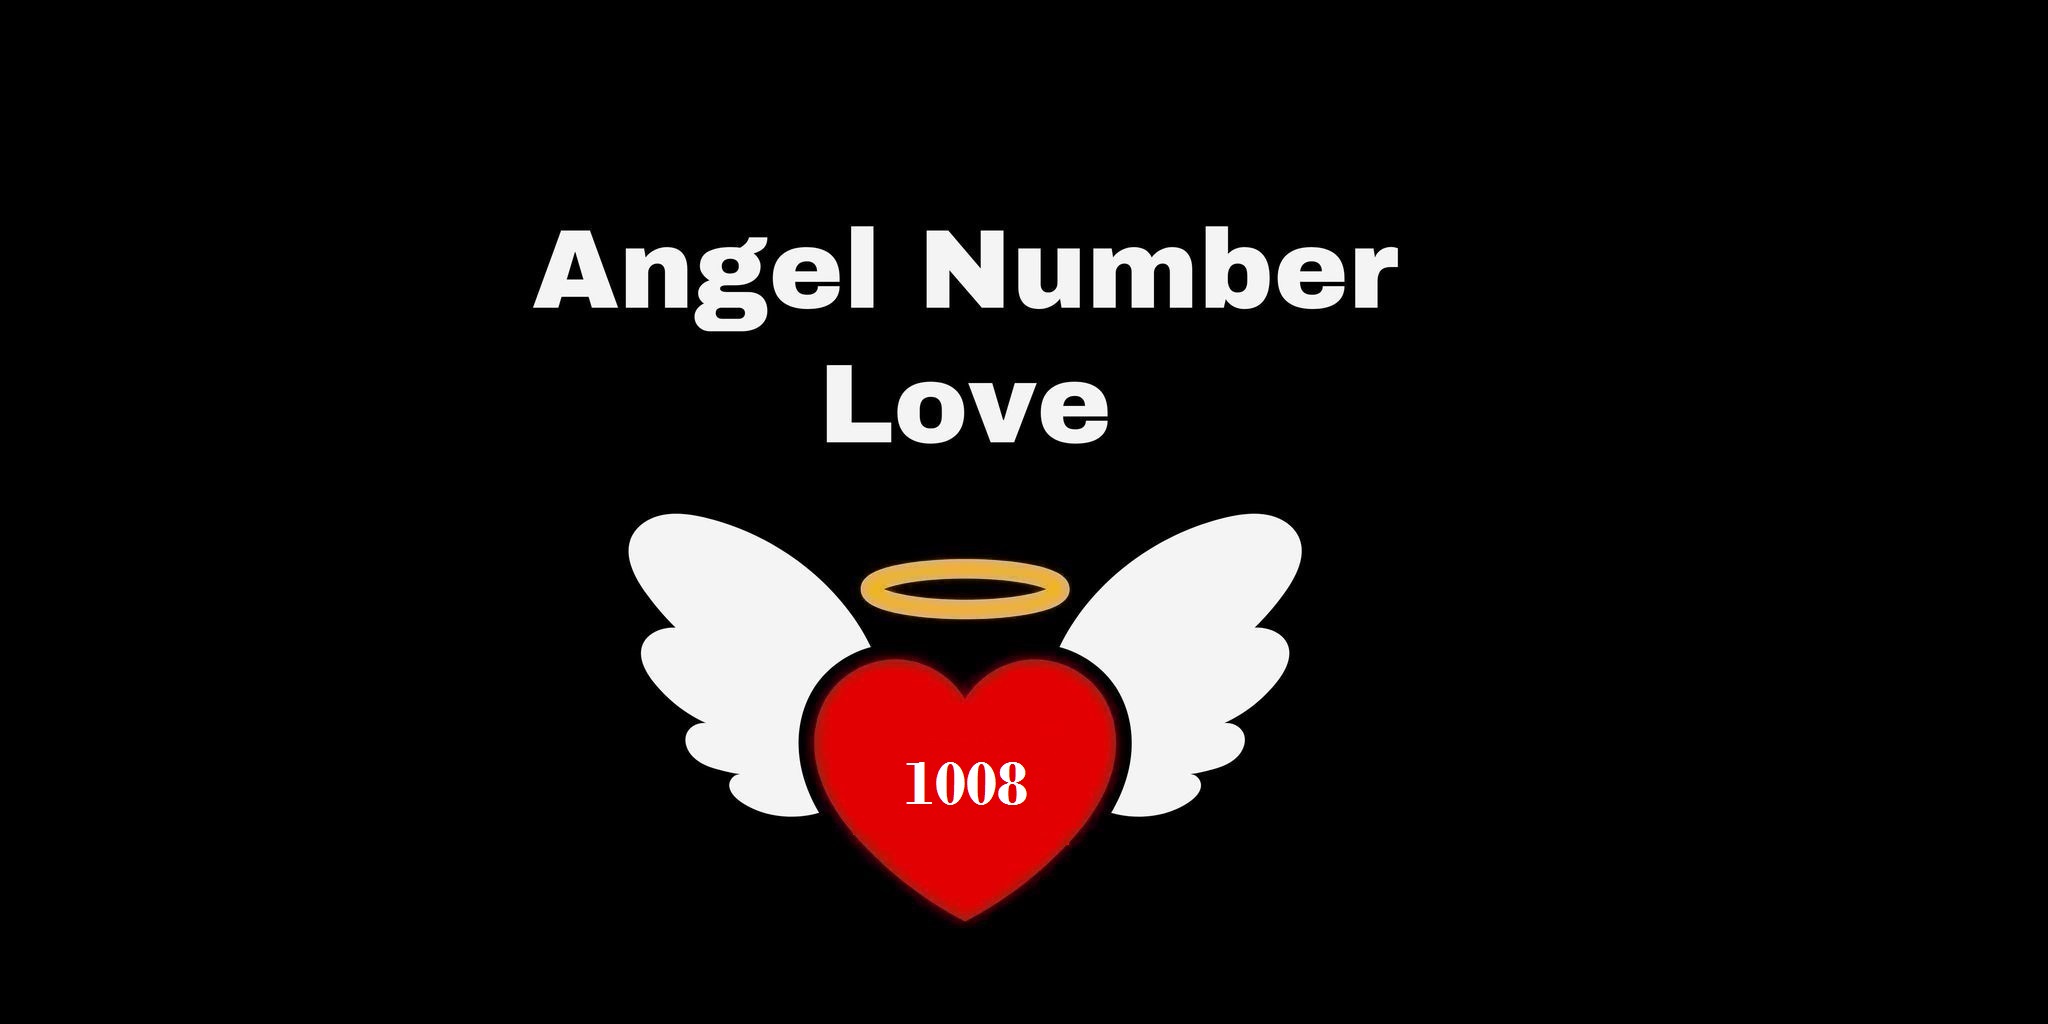 1008 Angel Number Meaning In Love